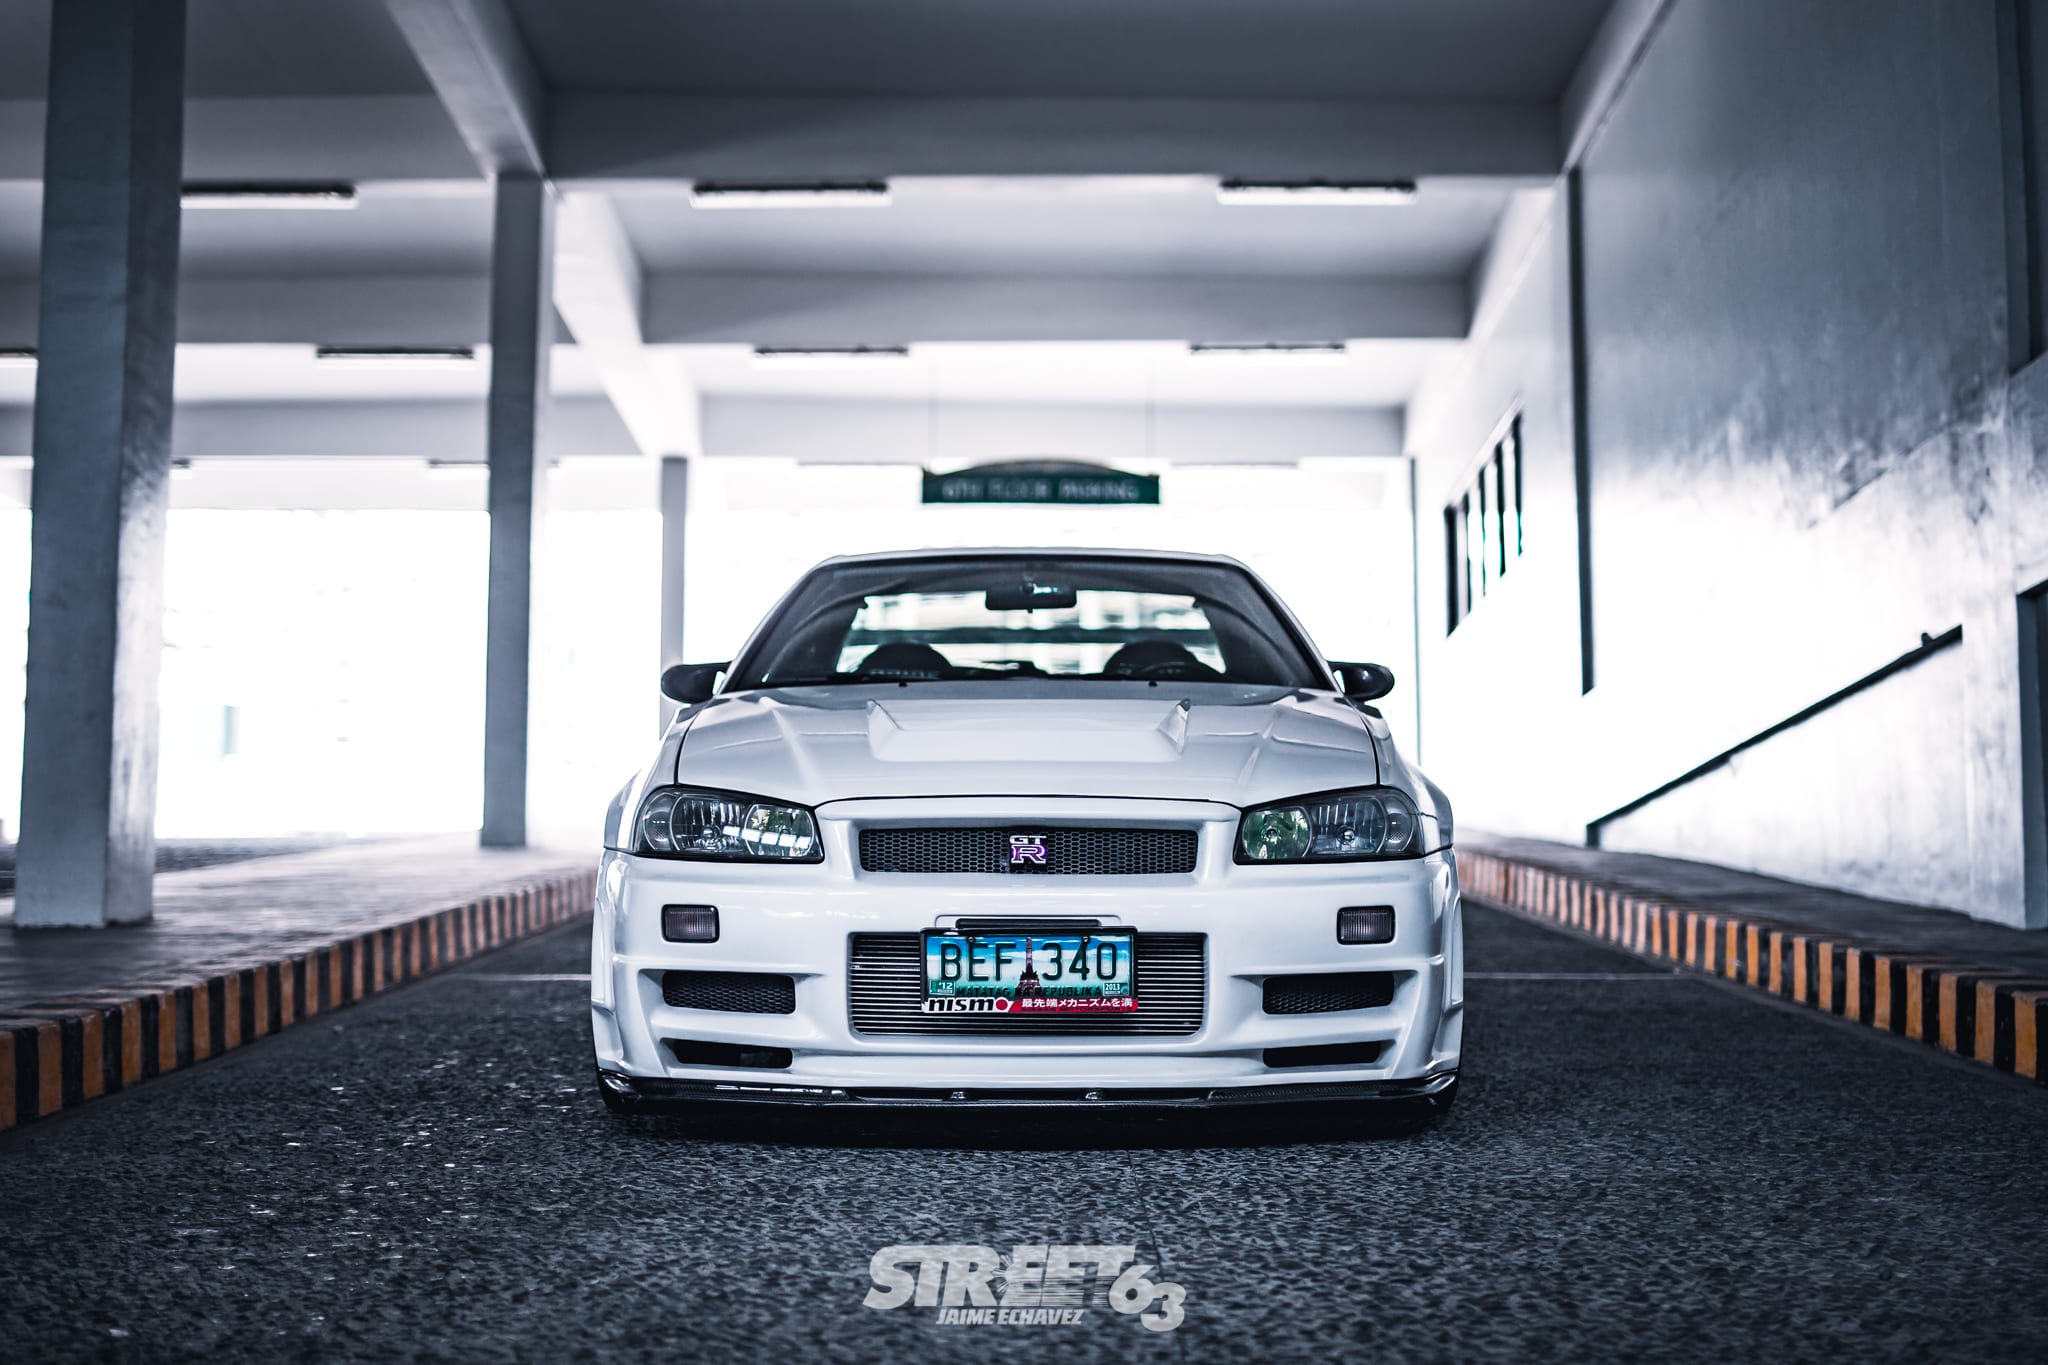 **Zilla in Manila:** The ins and outs of a Manila-spec Skyline GT-R